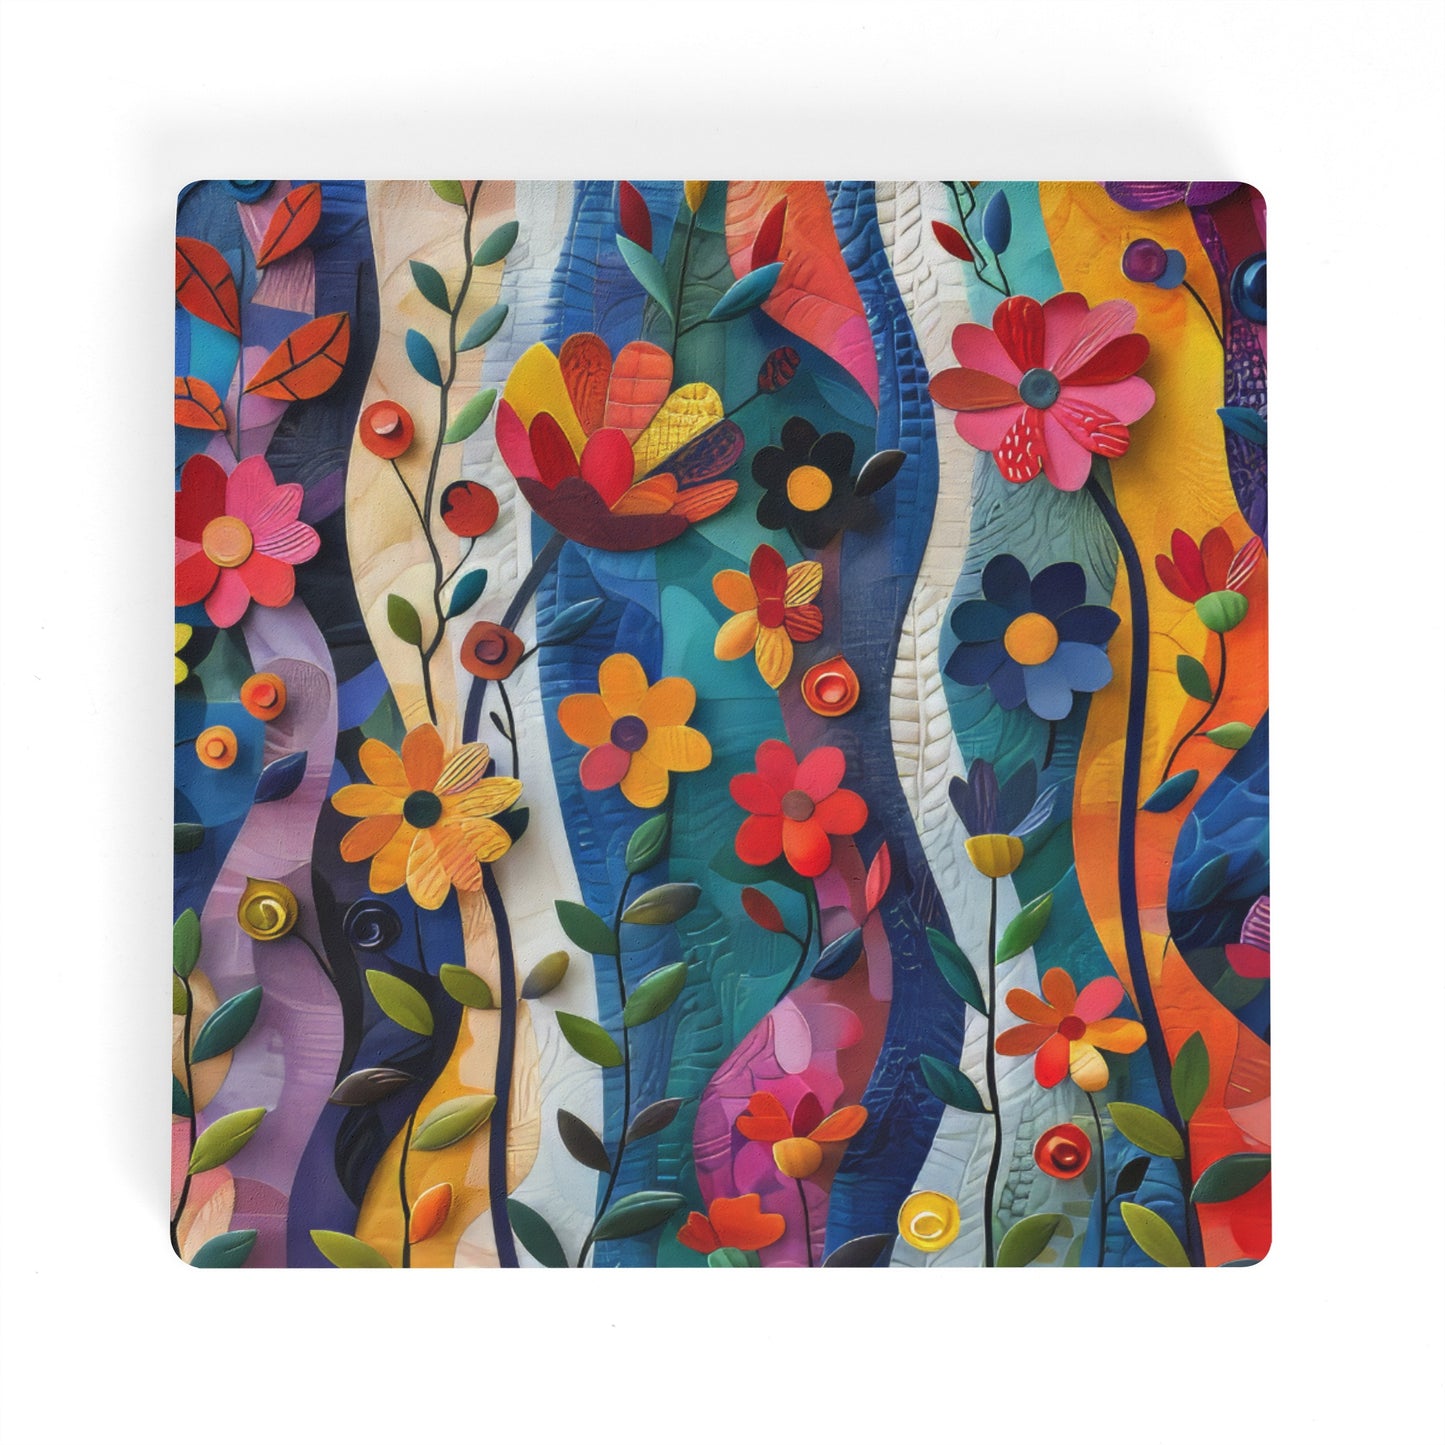 Vibrant Flower Garden in 3d Abstract Design Square Ceramic Coasters - Set of 4